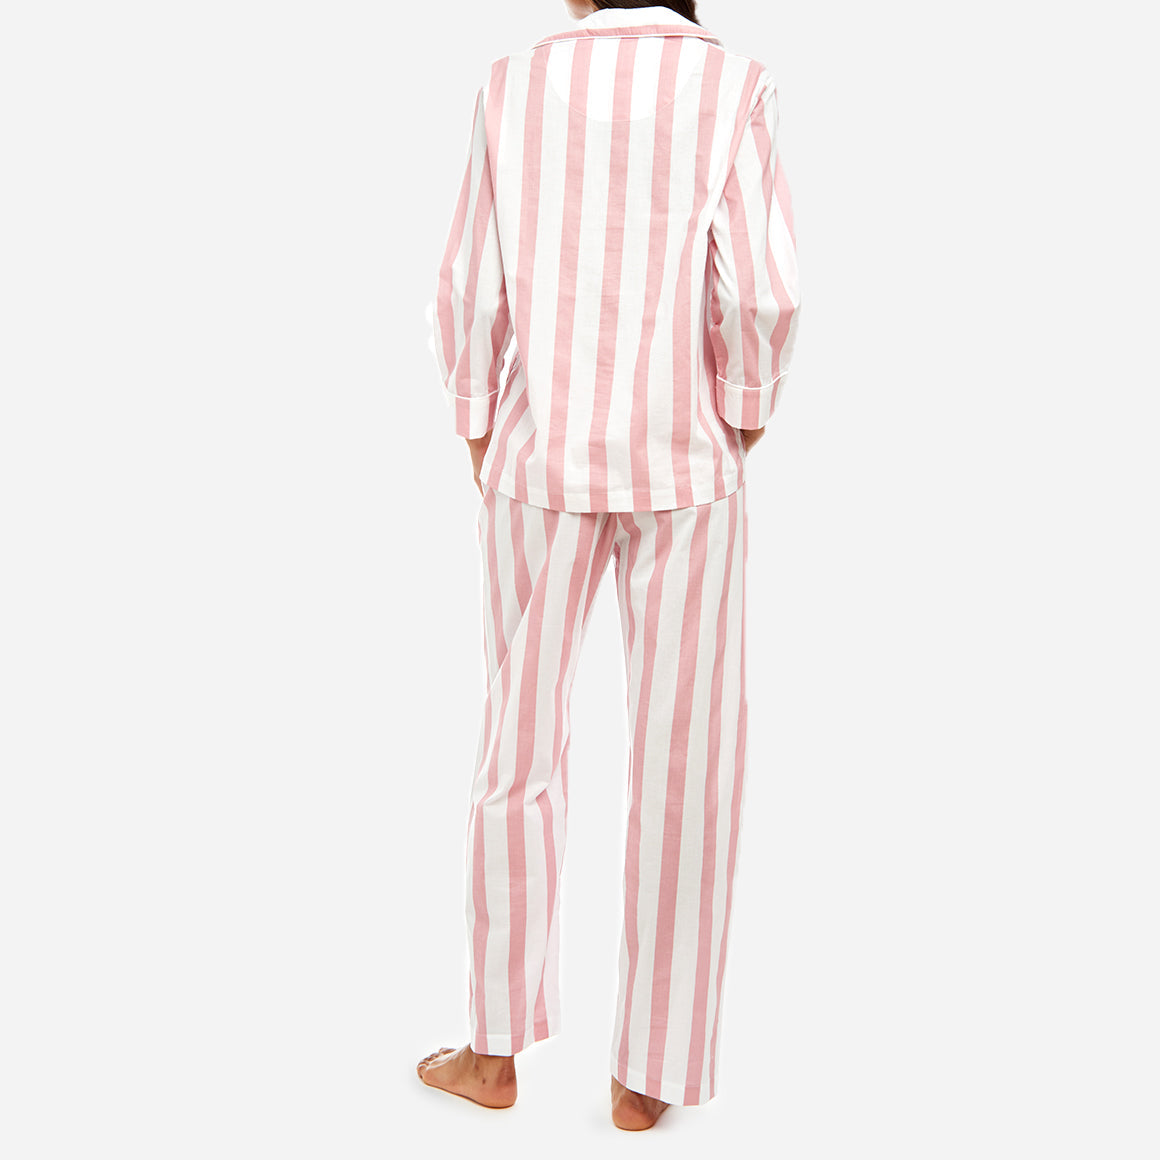 This striped set is made from breathable and soft GOTS-certified organic cotton voile that feels light and airy on your skin. The pajama shirt has a boxy fit for unrestricted movement, while the straight leg pants feature a comfy elastic waist for a custom fit that can be worn high on the waist or low on the hips.